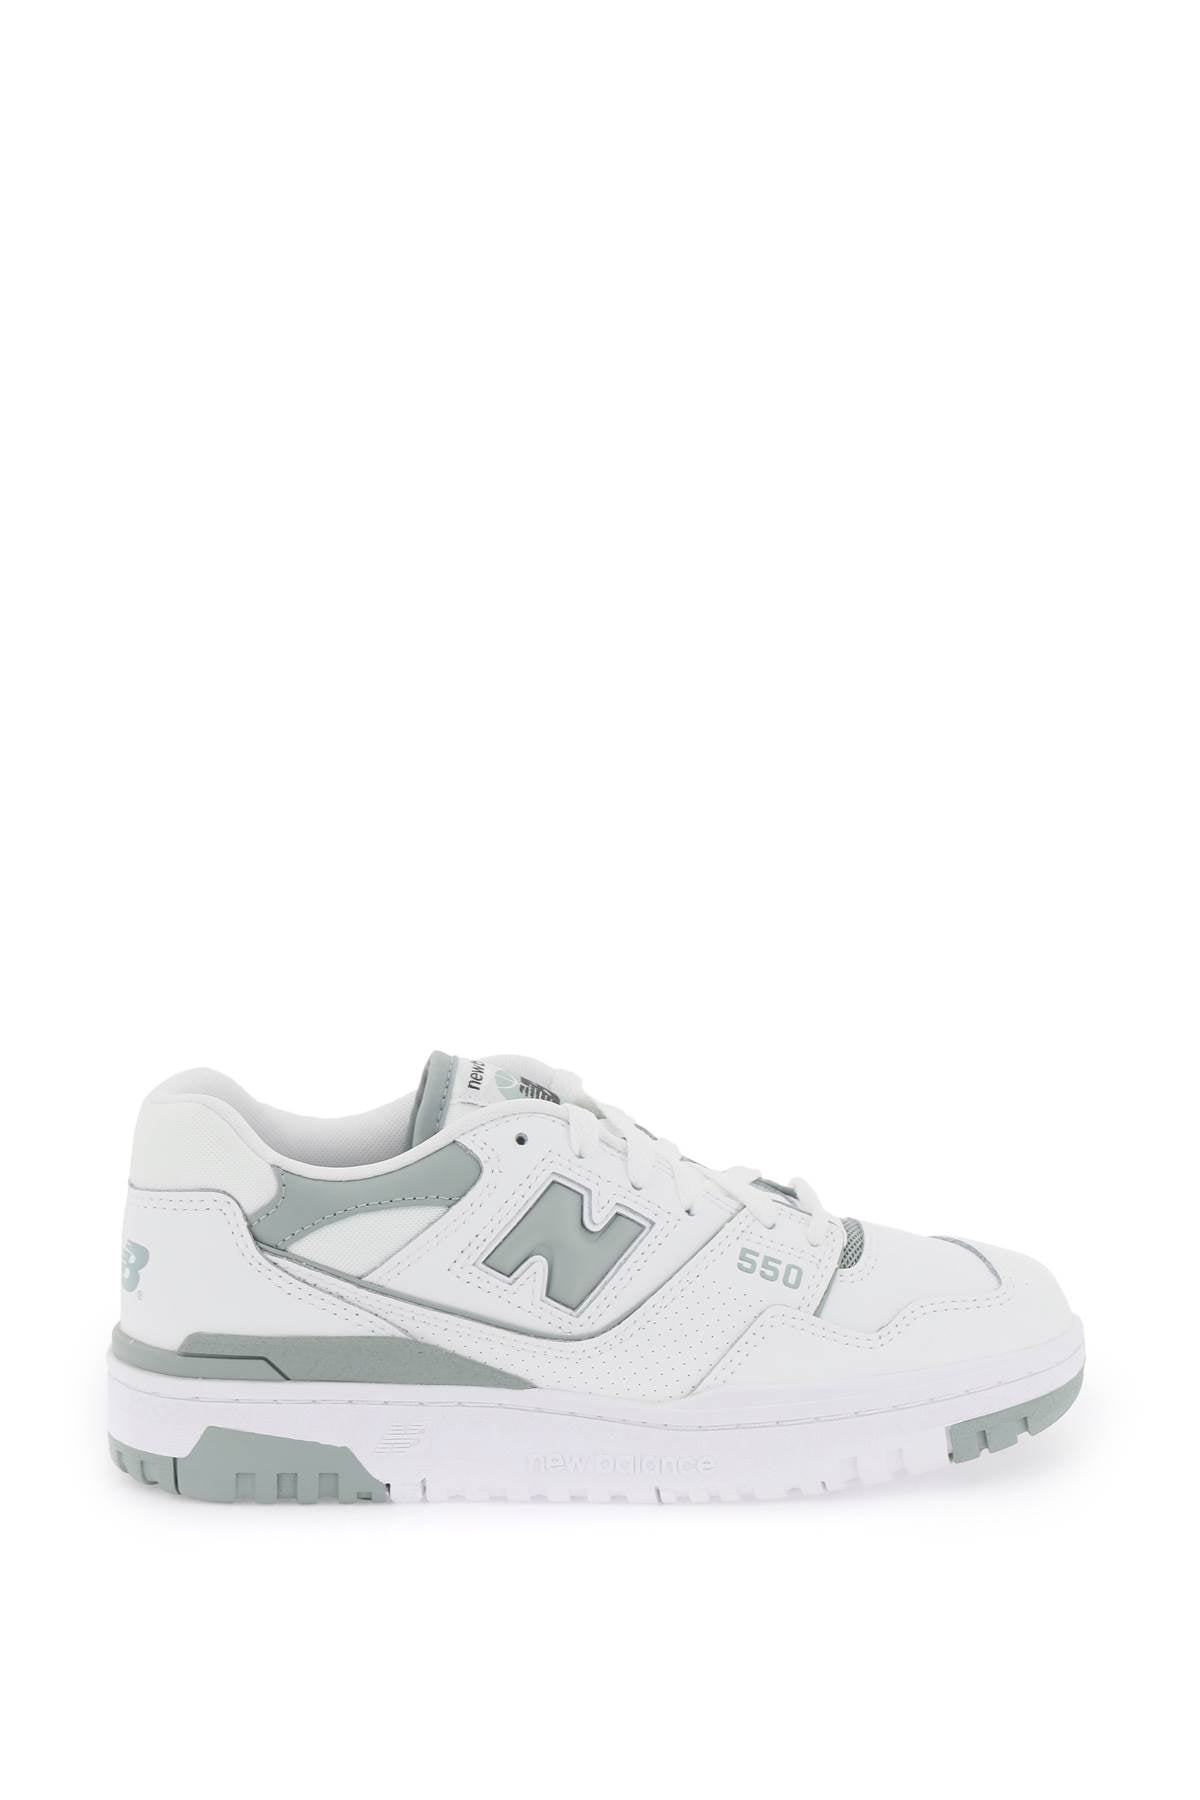 Shop New Balance 550 Sneakers In White, Green